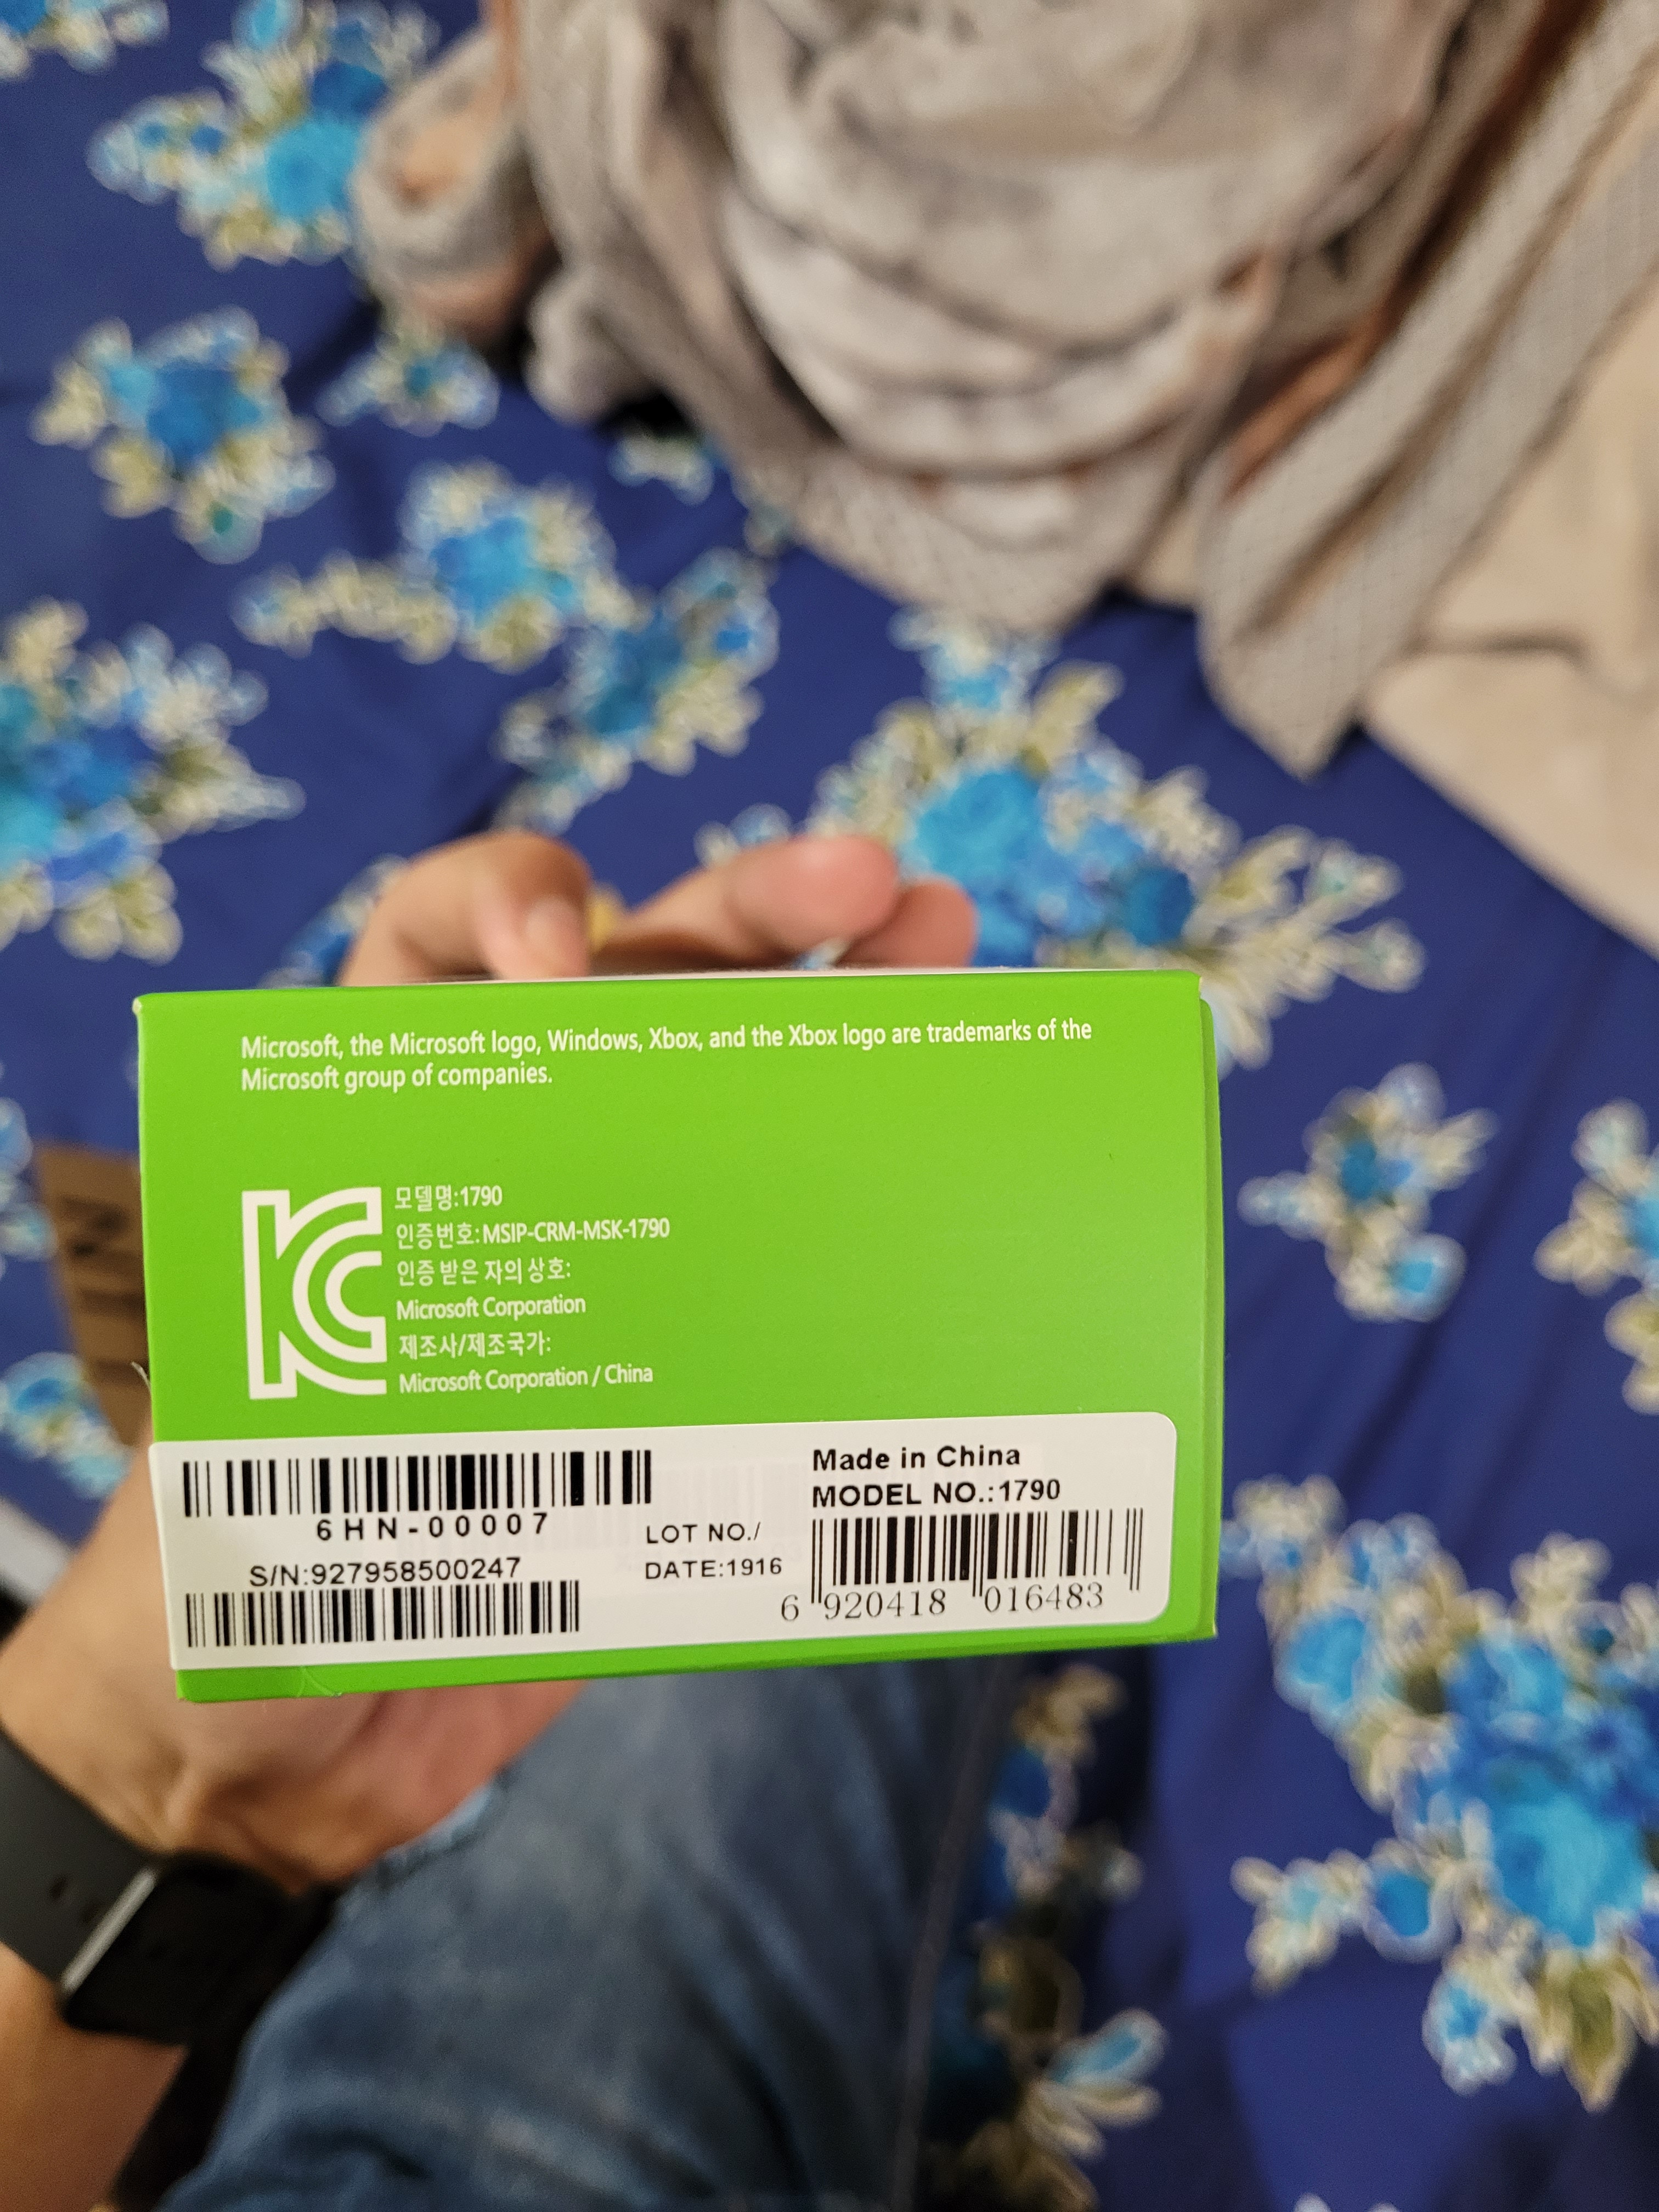 hello is my xbox wireless adapter fake or not ? because it came with  chinese package : r/xbox